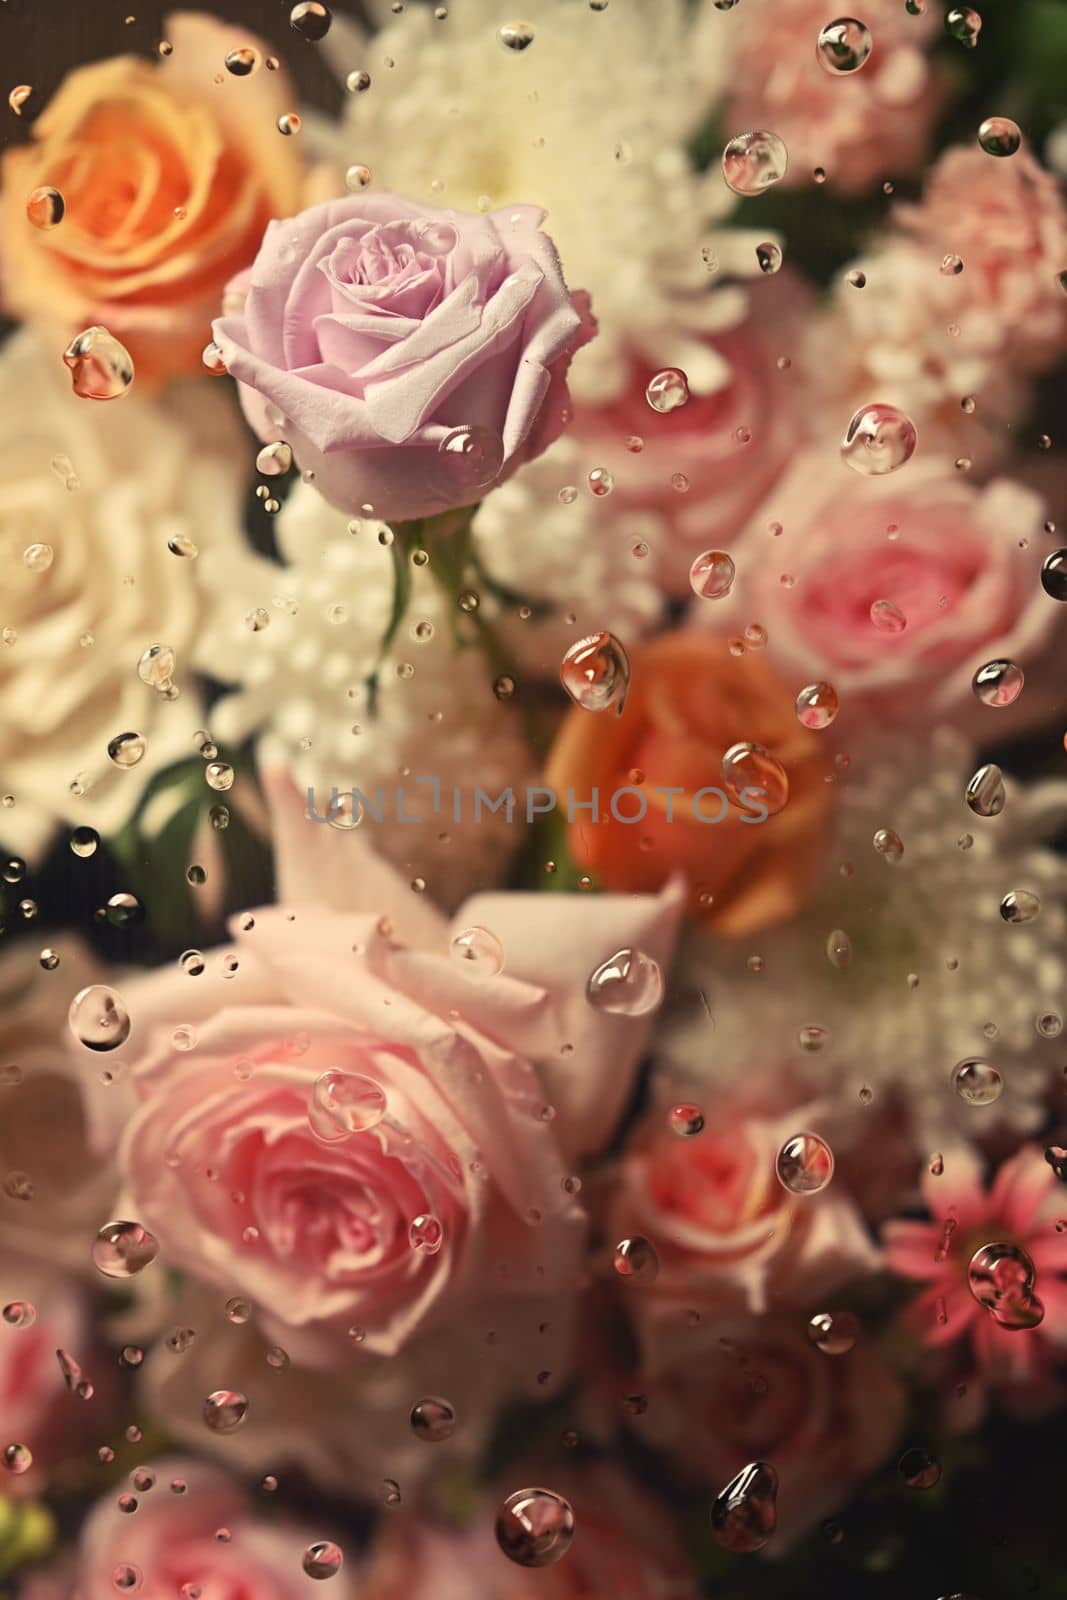 Pink, orange and peach roses under transparent glass with condensation drops texture. Floral botanical wallpaper by prathanchorruangsak